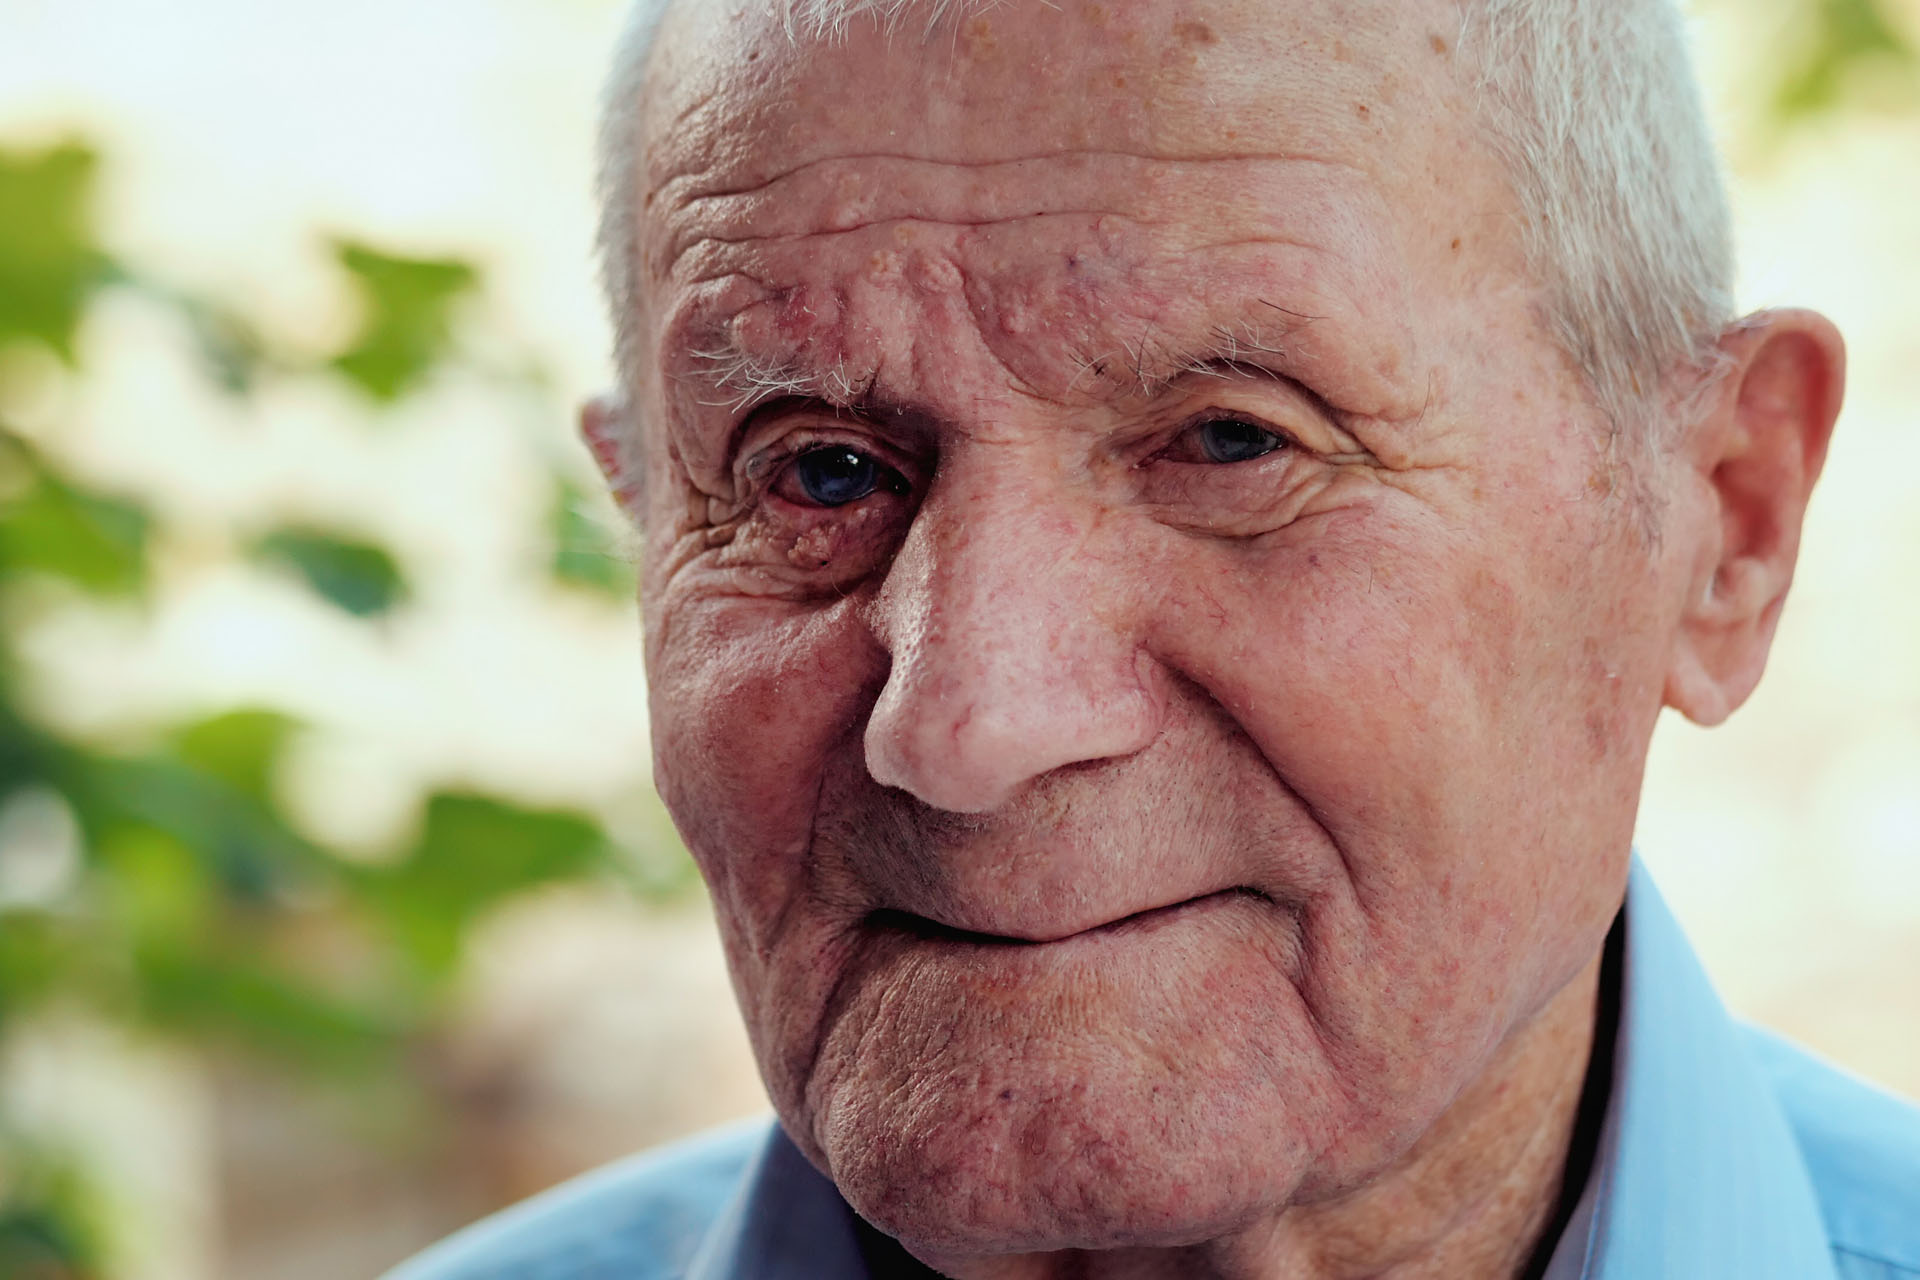 Very old man portrait with emotions. Grandfather is smiling and looking to camera. Portrait: aged, elderly, senior. Close-up of old man sitting alone outdoors.